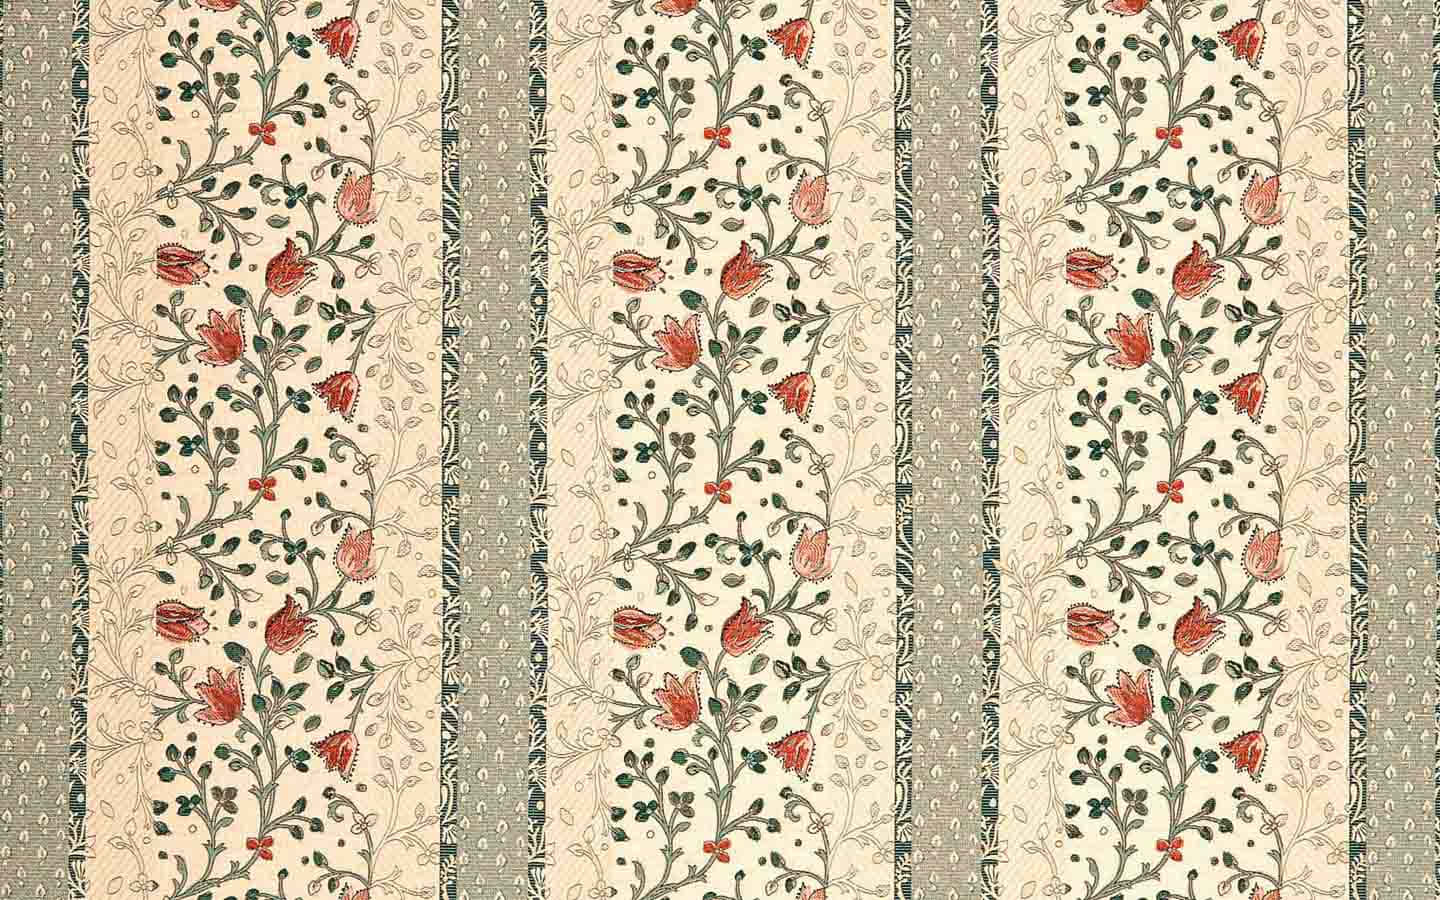 A Floral Striped Fabric With Red And Green Flowers Wallpaper